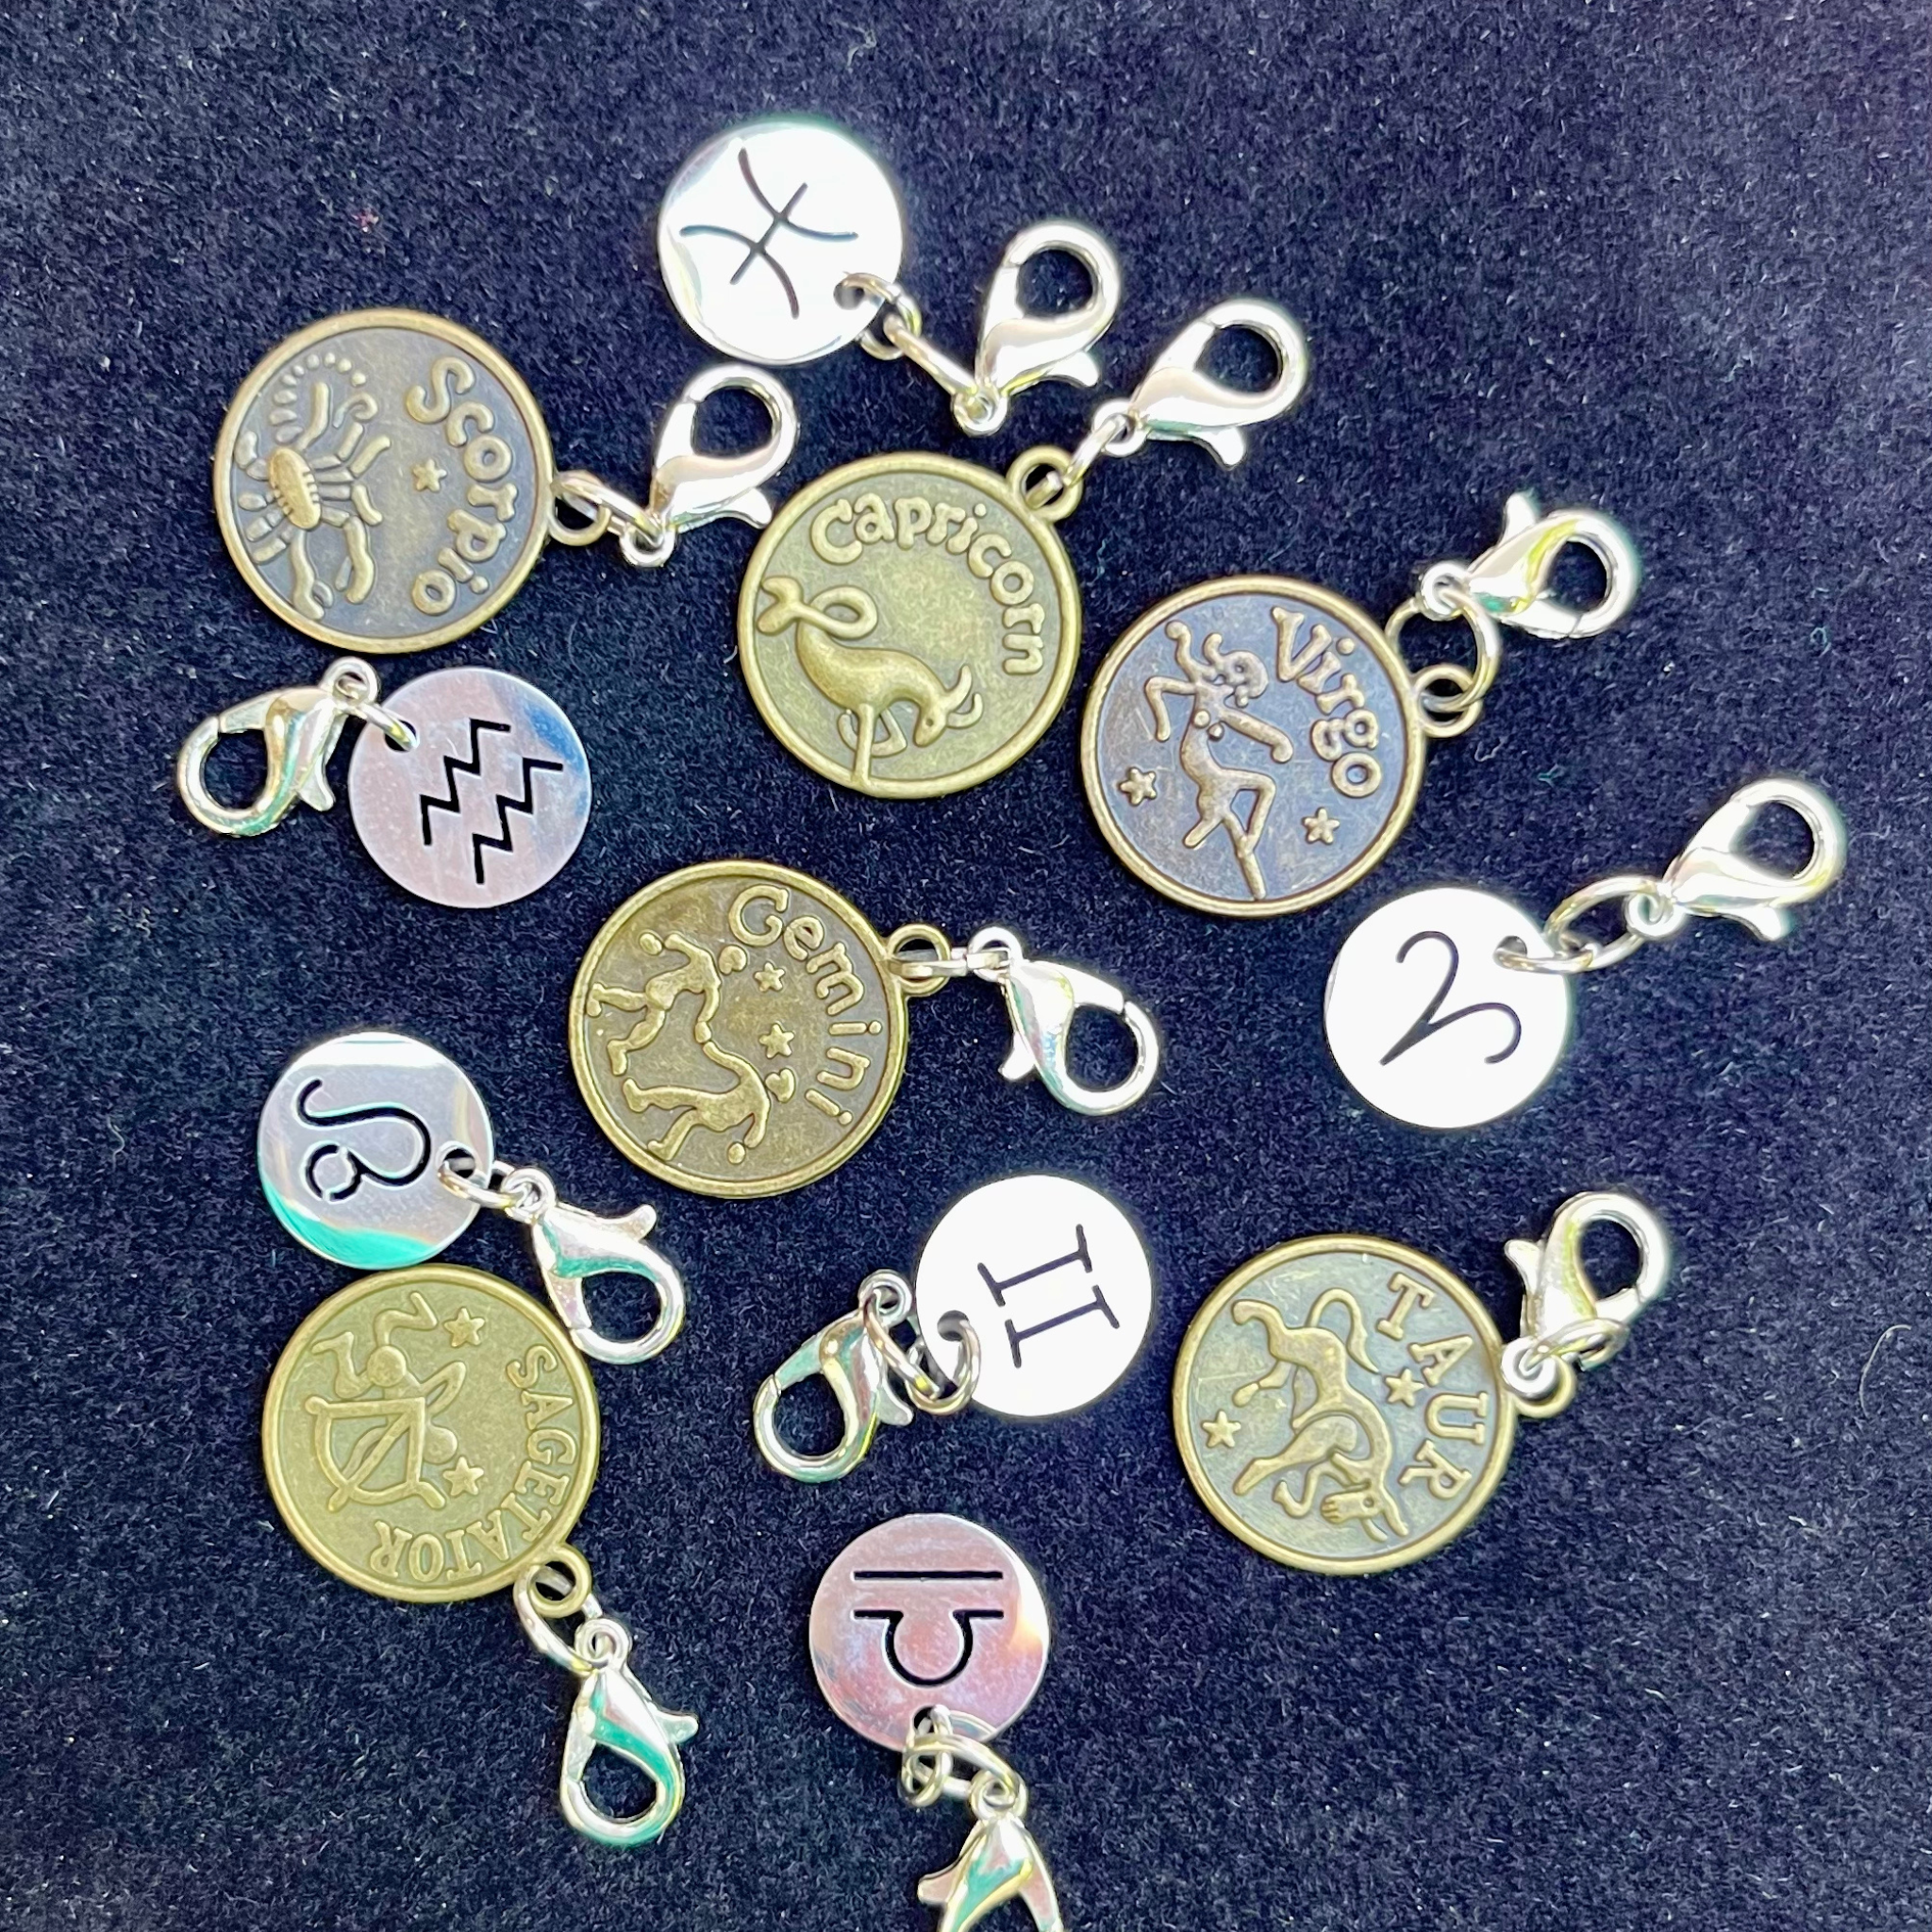 12 Charm Bundle with Chain and Pendant